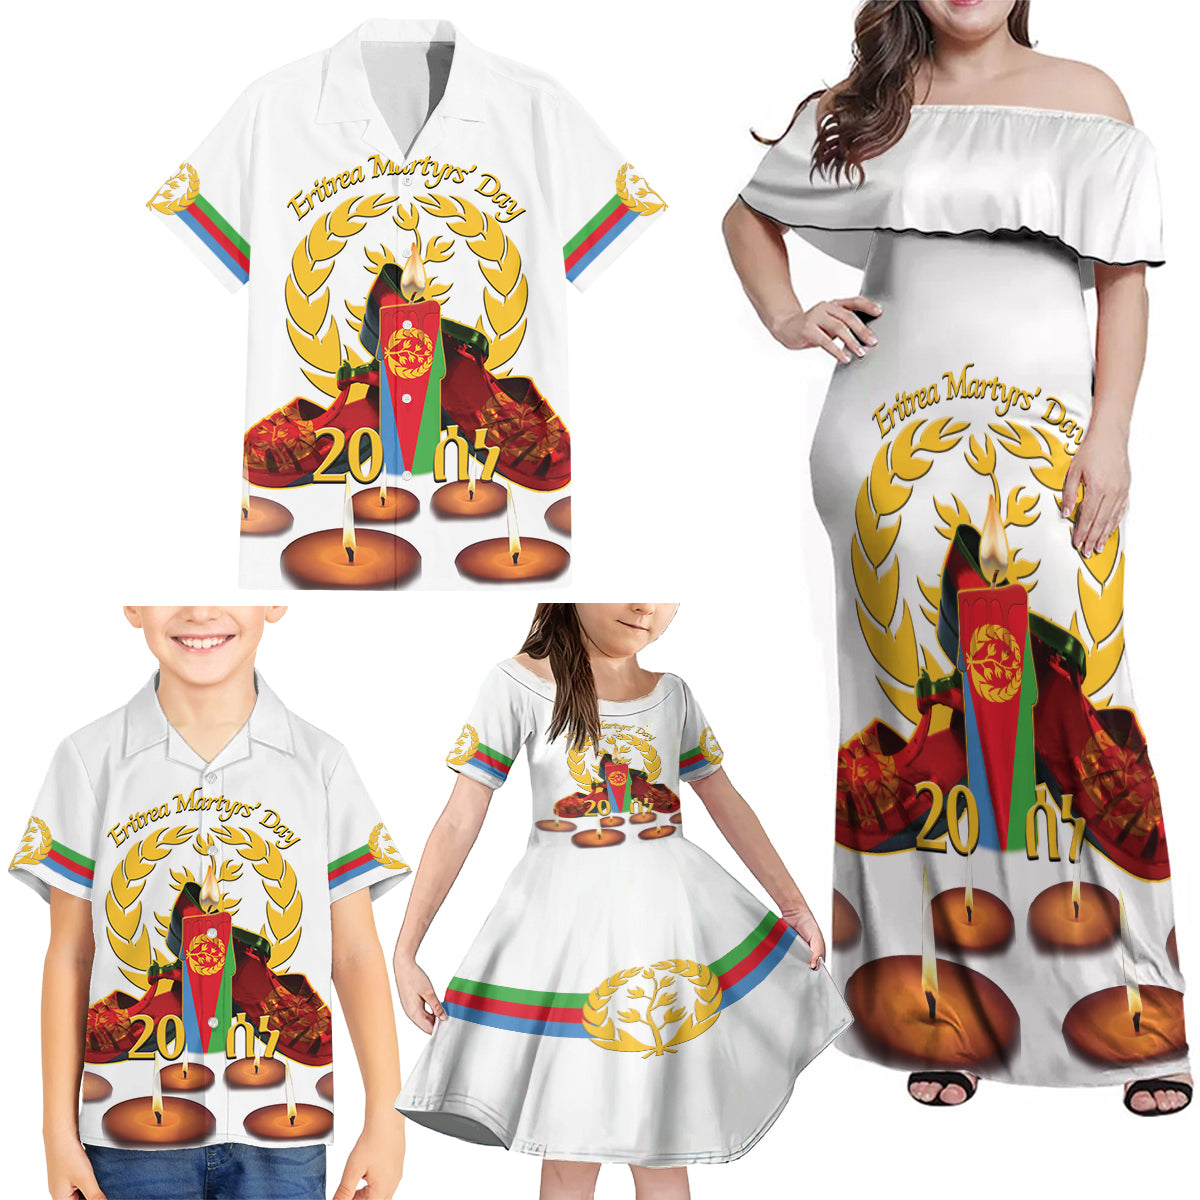 Custom Eritrea Martyrs' Day Family Matching Off Shoulder Maxi Dress and Hawaiian Shirt 20 June Shida Shoes With Candles - White